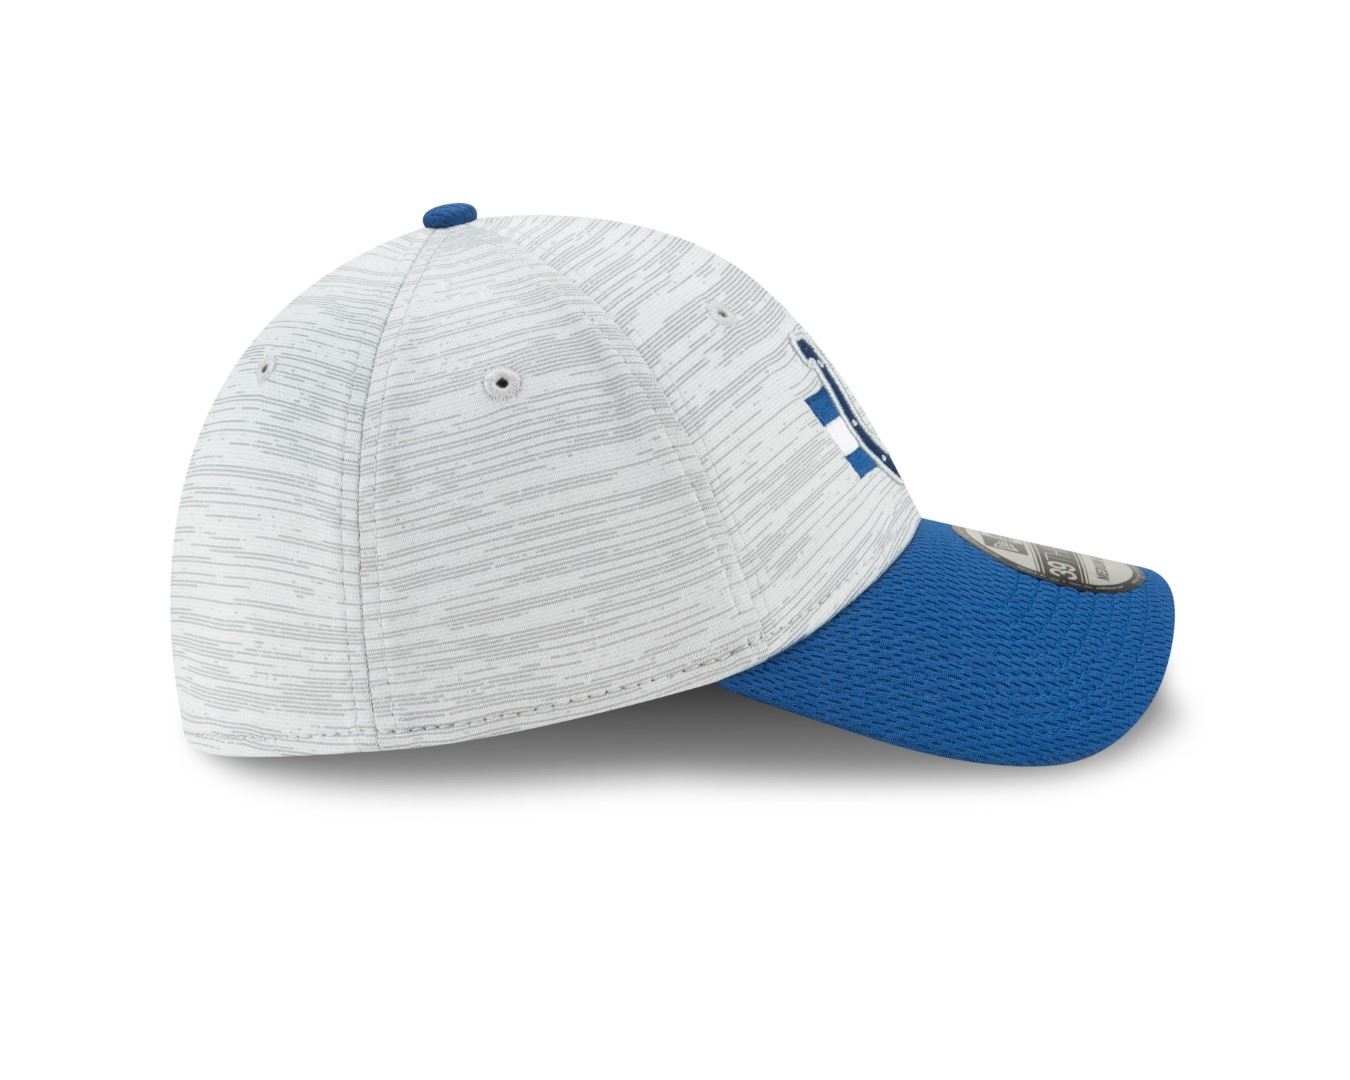 Indianapolis Colts NFL Training 2021 Grey 39Thirty Stretch Cap New Era